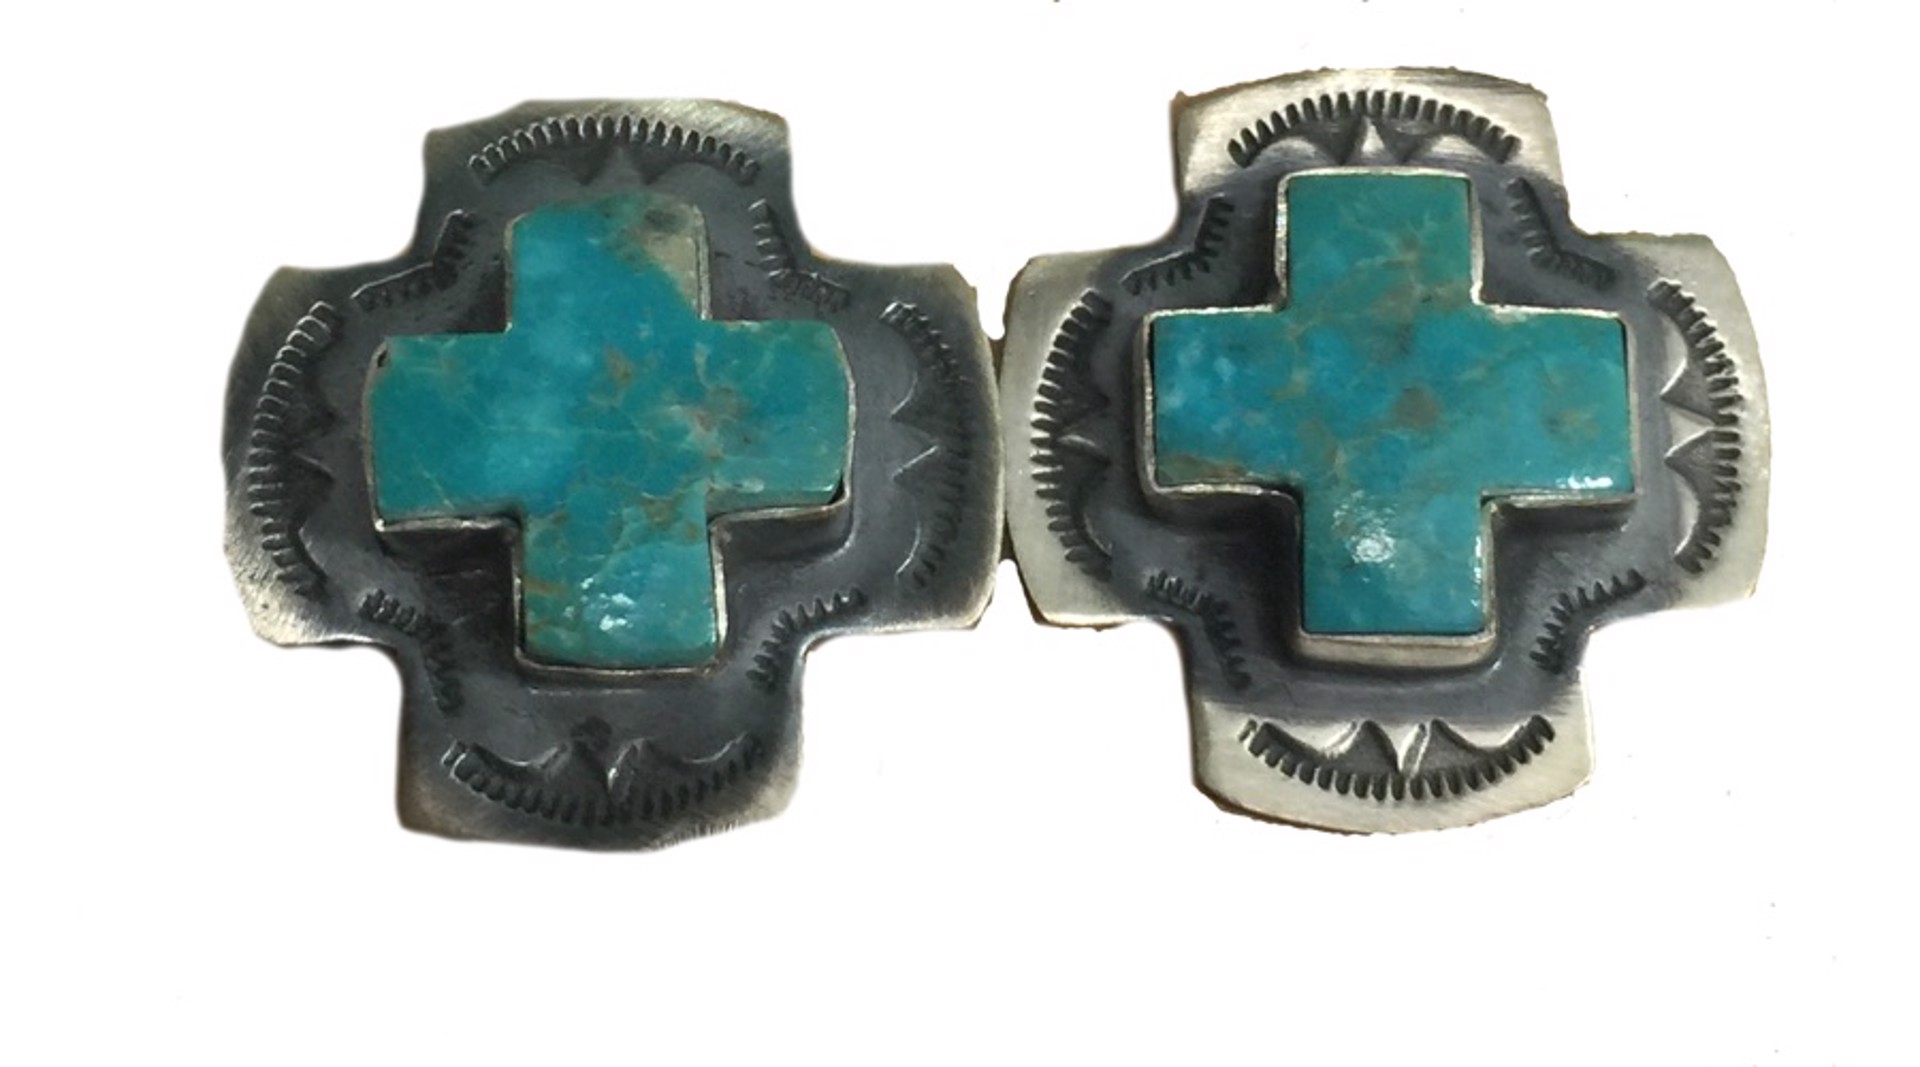 Earrings - Sterling Silver Square Cross With Turquoise by Dan Dodson